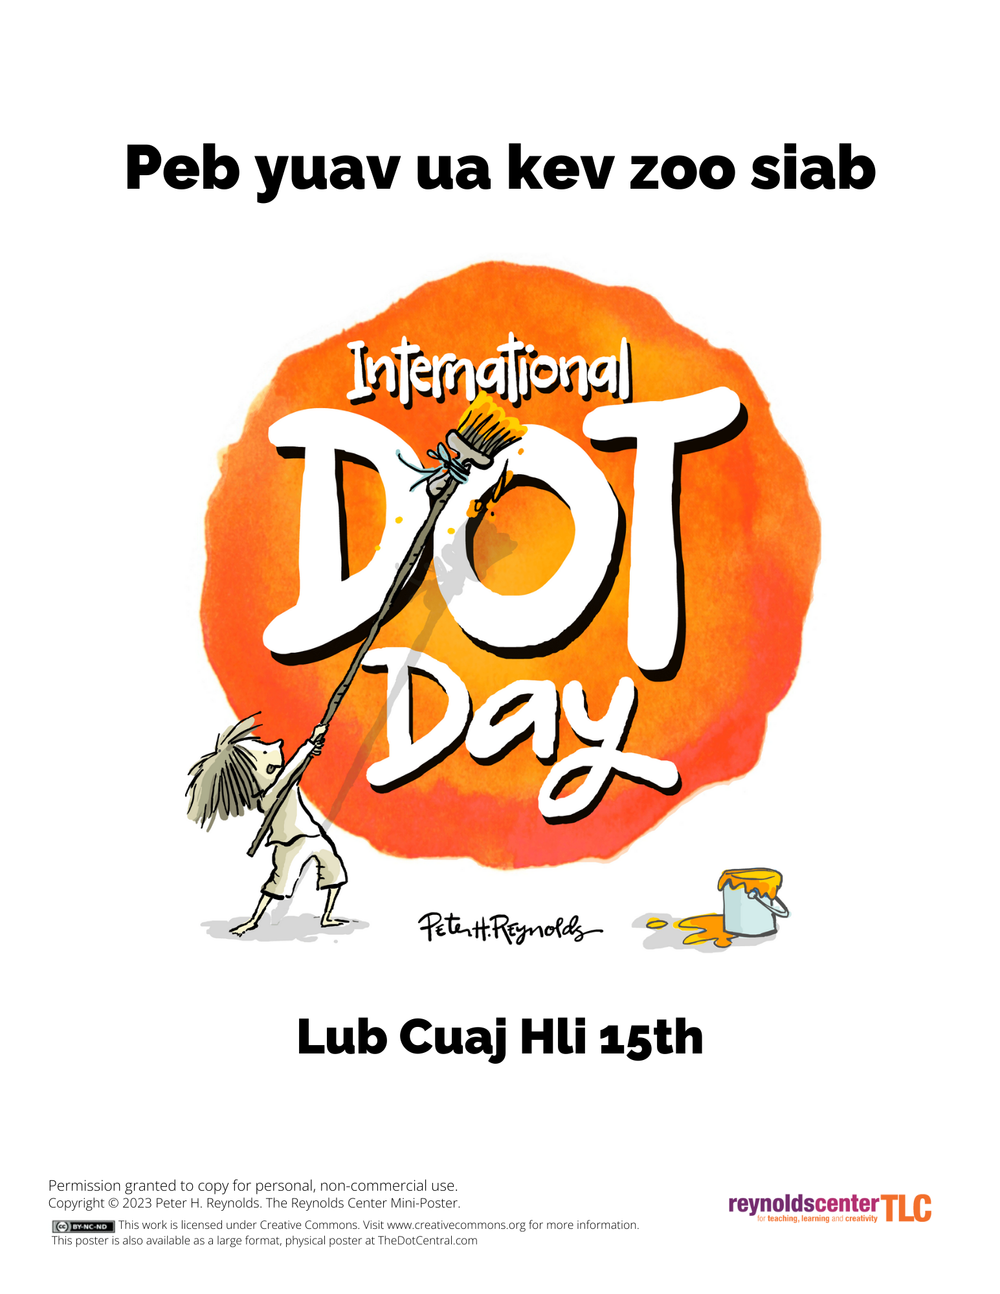 Dot T-shirt, based on the book THE DOT by Peter H. Reynolds for  International Dot Day.